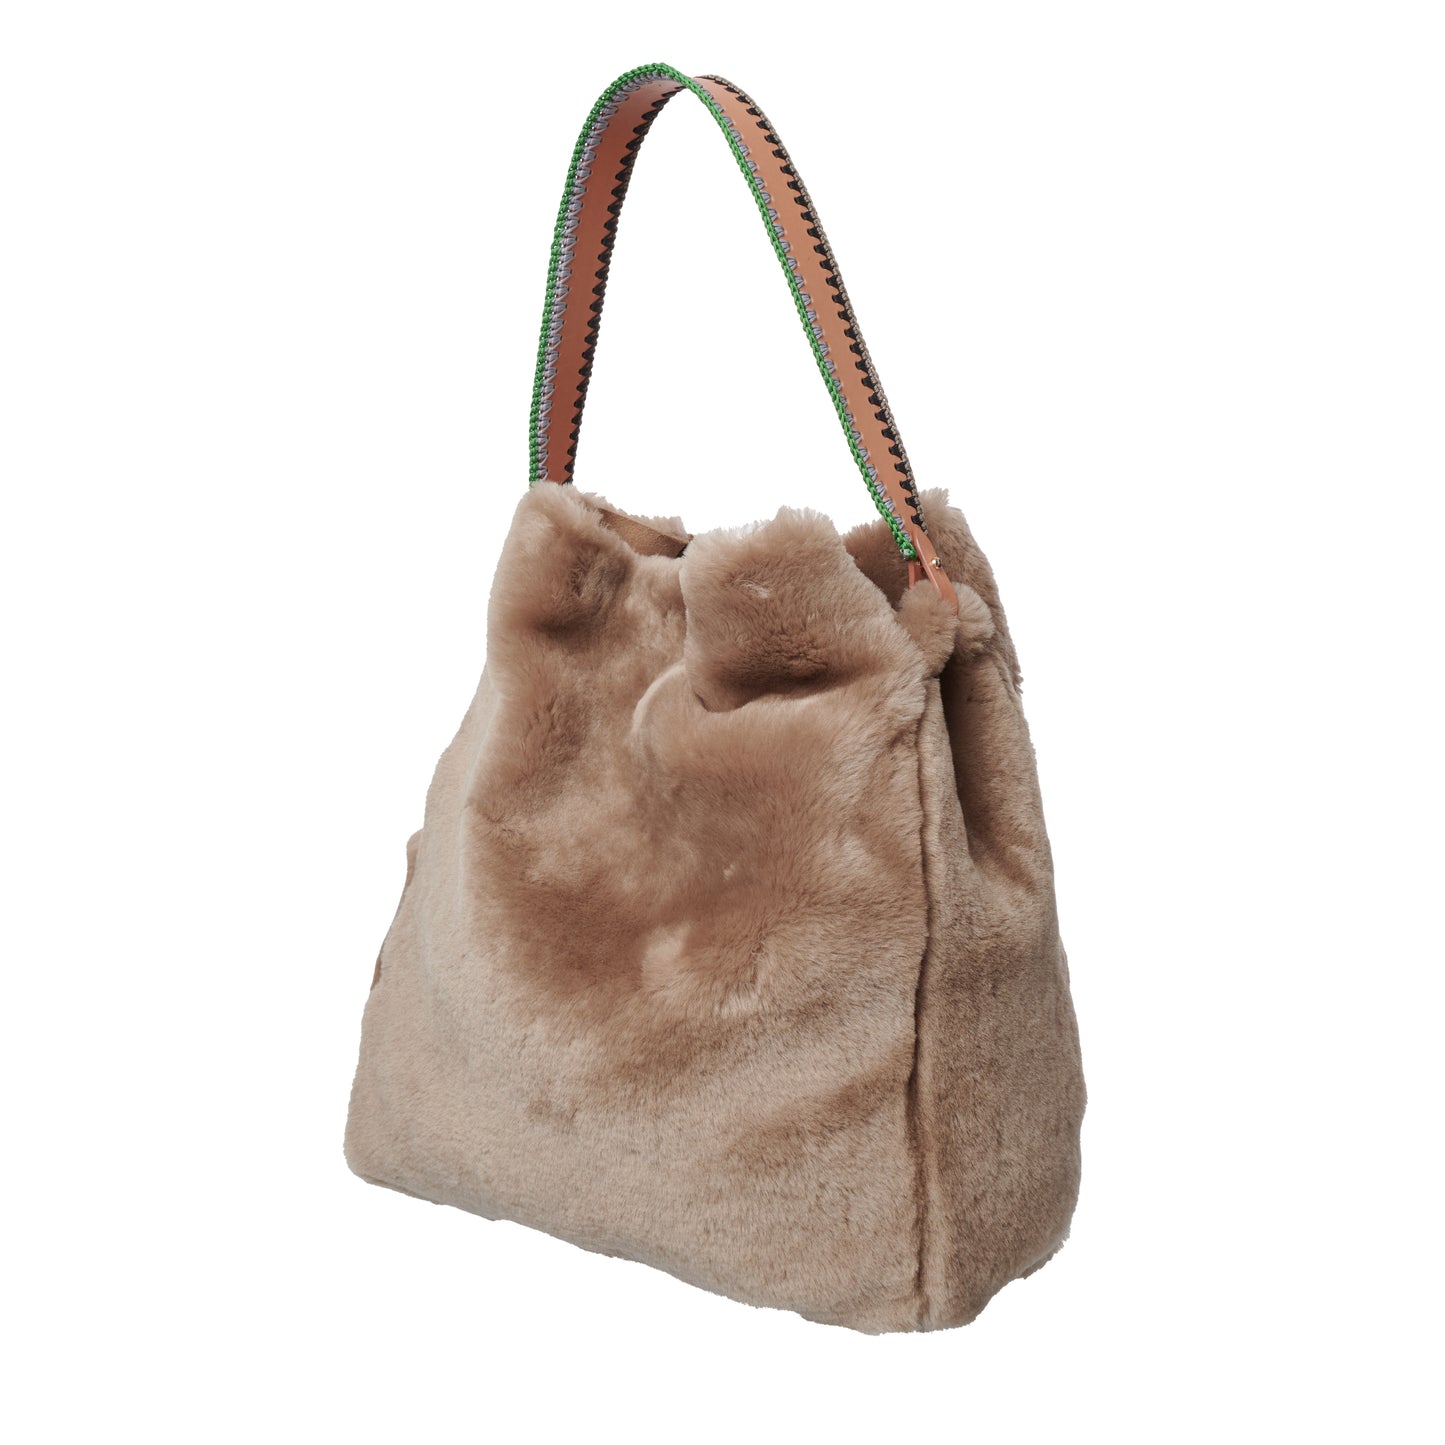 Hug Me Shopper XL sand & leather strap natural - multi colored stitching